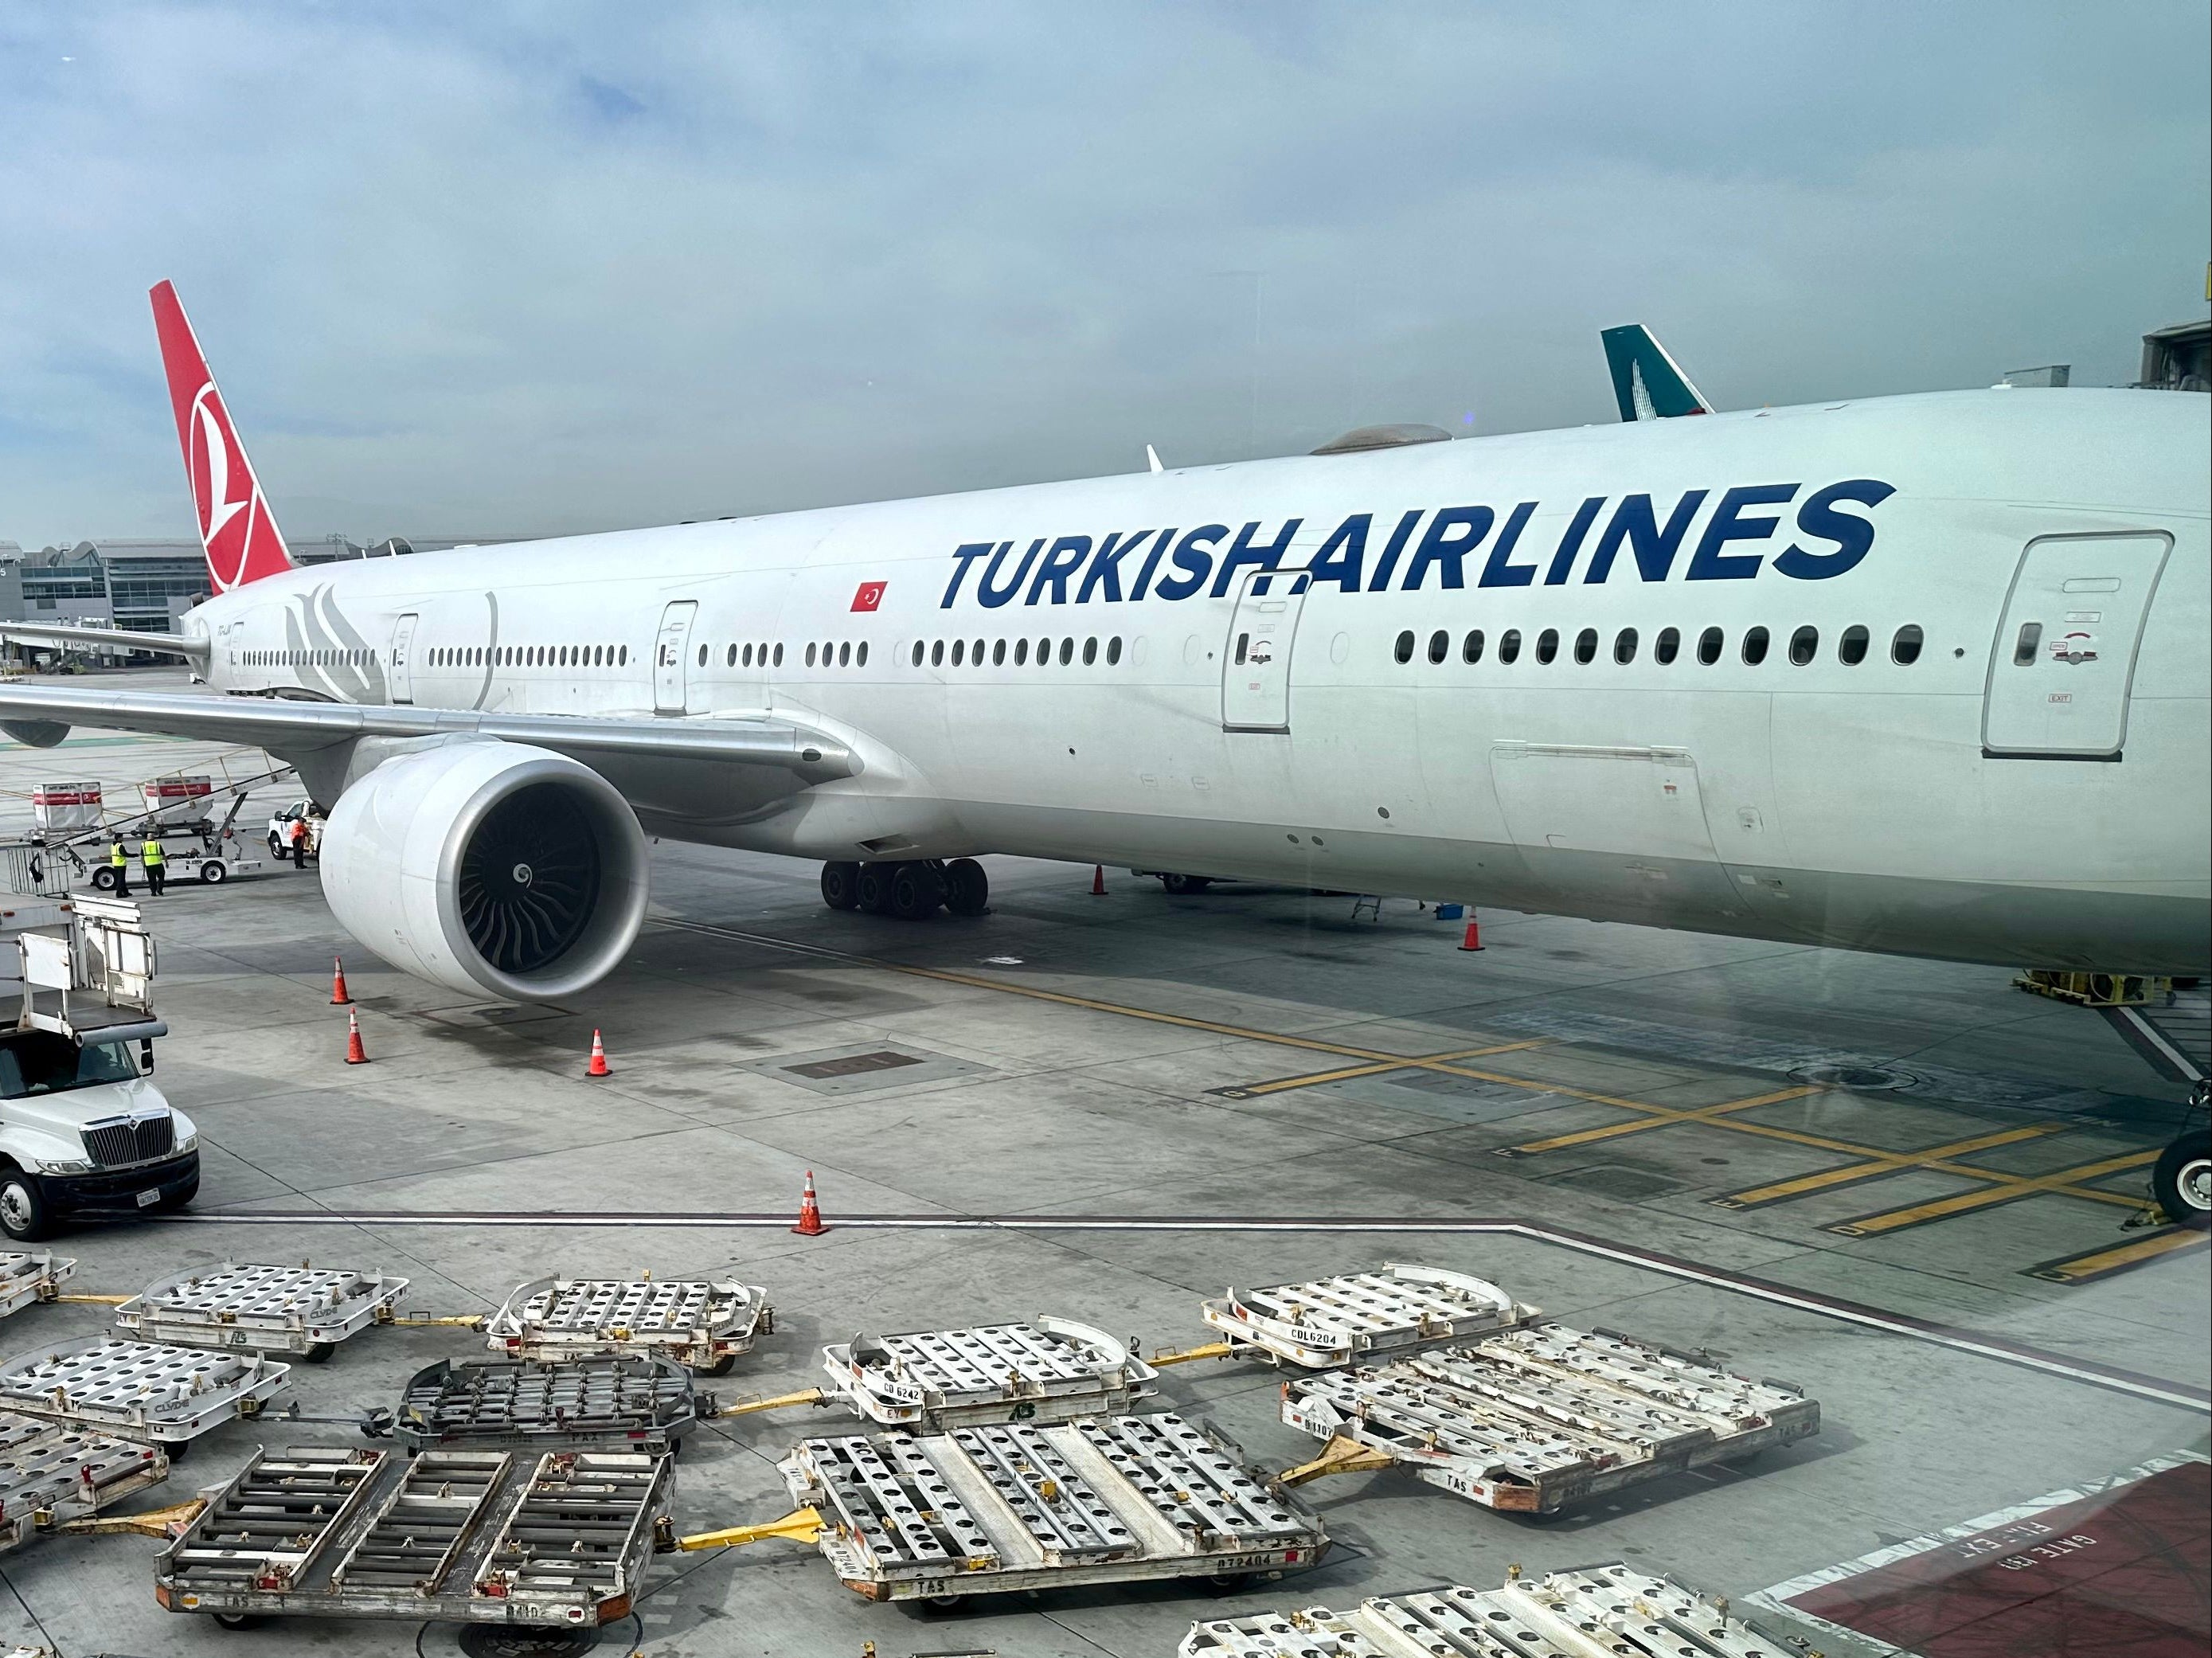 Empty baggage trucks are seen by a Turkish airlines Boeing 777 at Los Angeles International Airport (LAX) on January 11, 2023